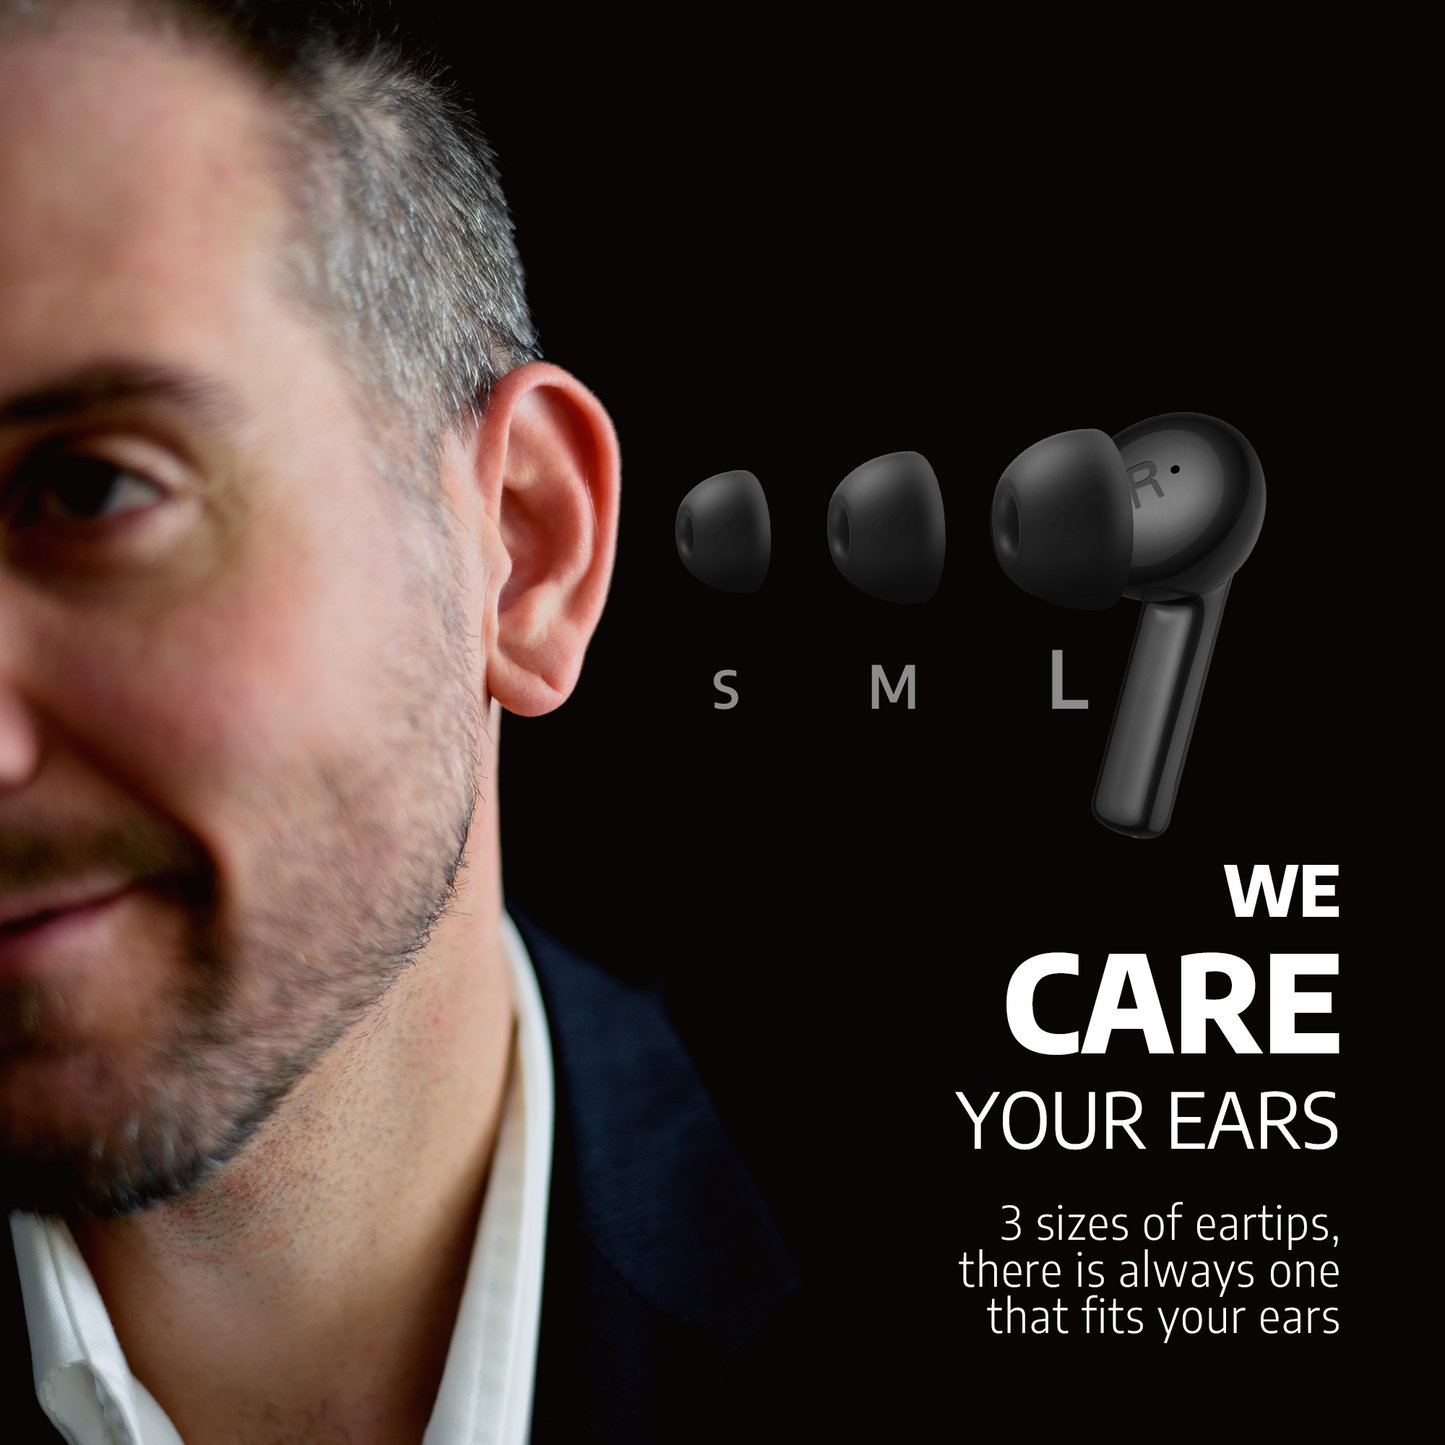 SINAAUDIO S1 - Wireless In-Ear Earbuds with Active Noise Cancellation (ANC) and Charging Case